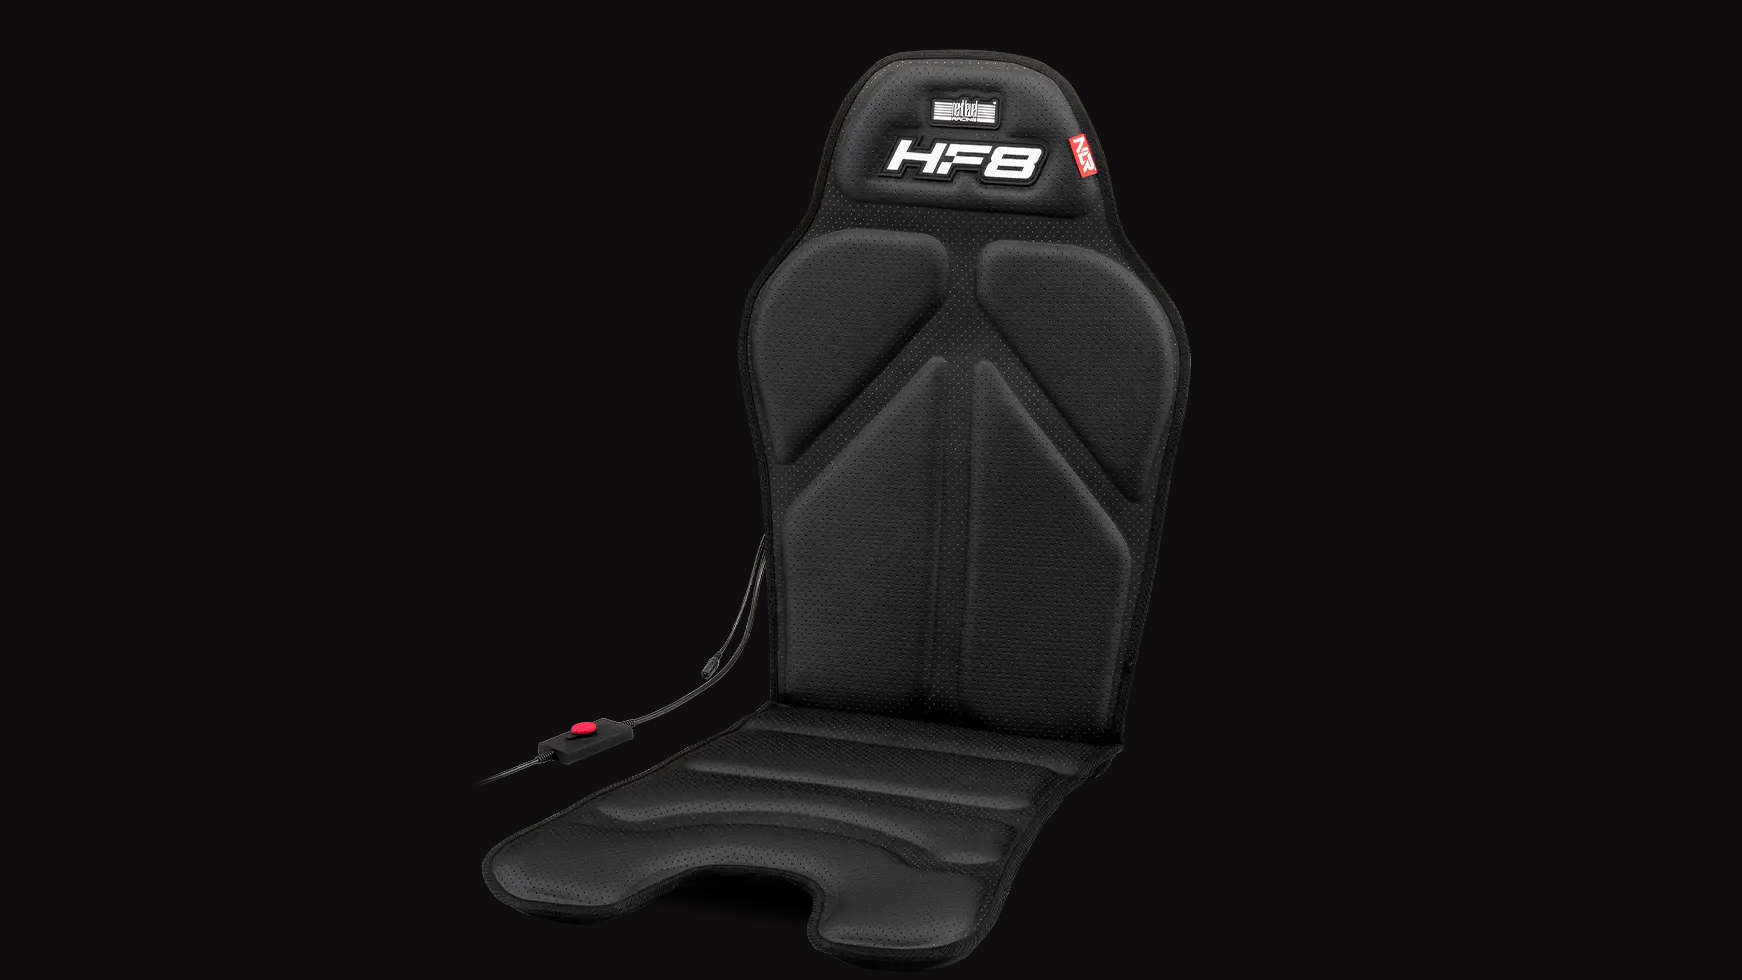 The Next Level Racing HF8 Haptic Gaming Pad Launches - ORD